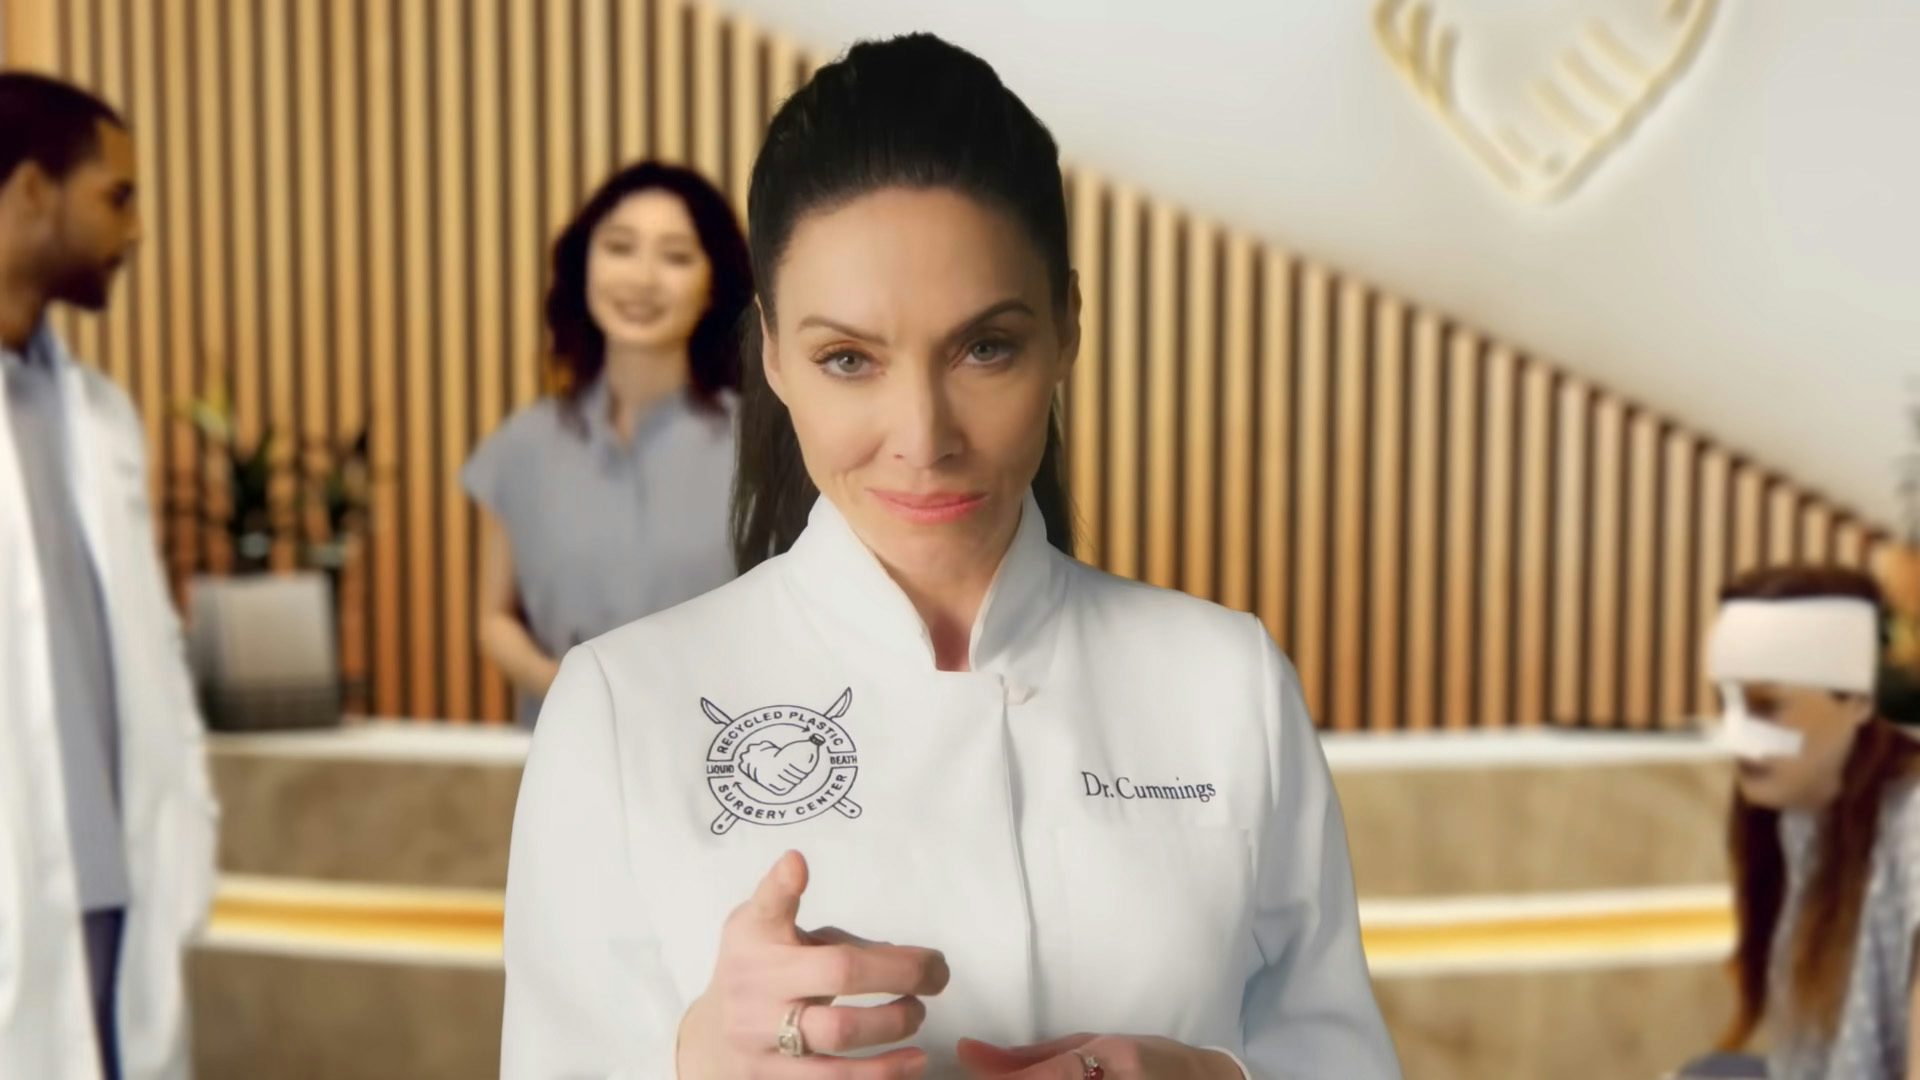 Still from Liquid Death's spoof advert showing actor Whitney Cummings in the role of a surgery saleswoman, wearing a white lab coat and pointing at the camera with a smile,